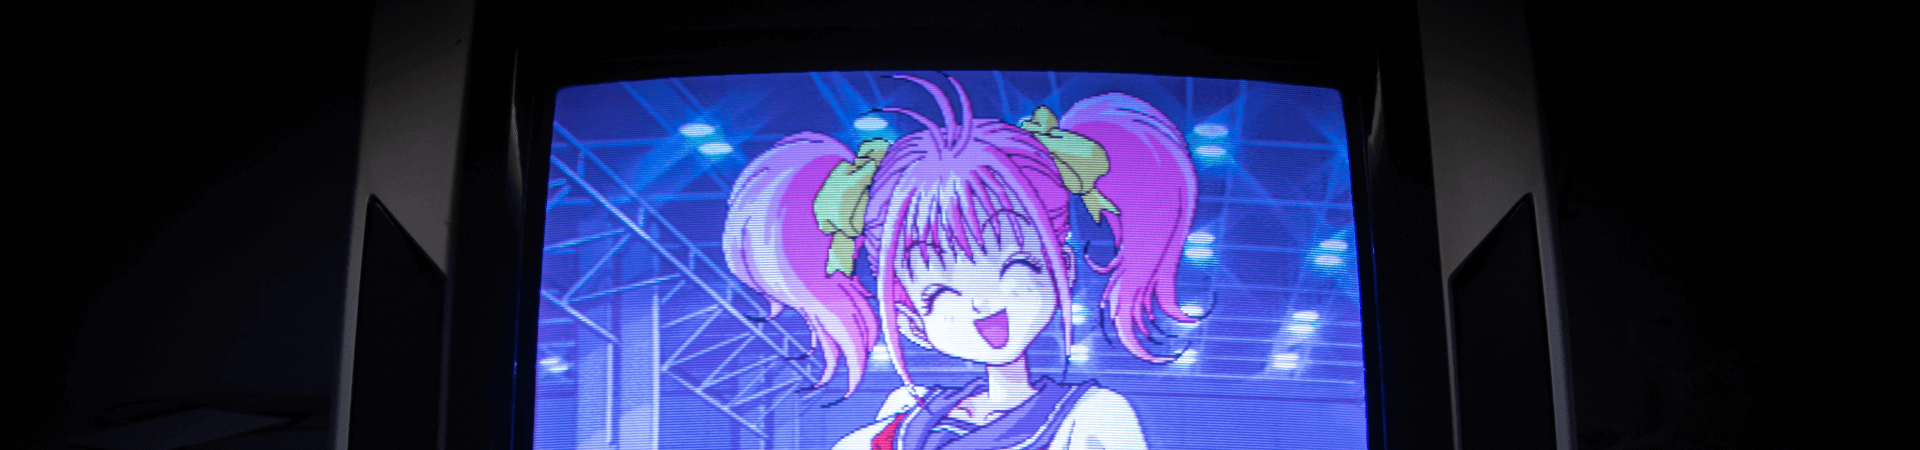 Girl anime character on a TV screen